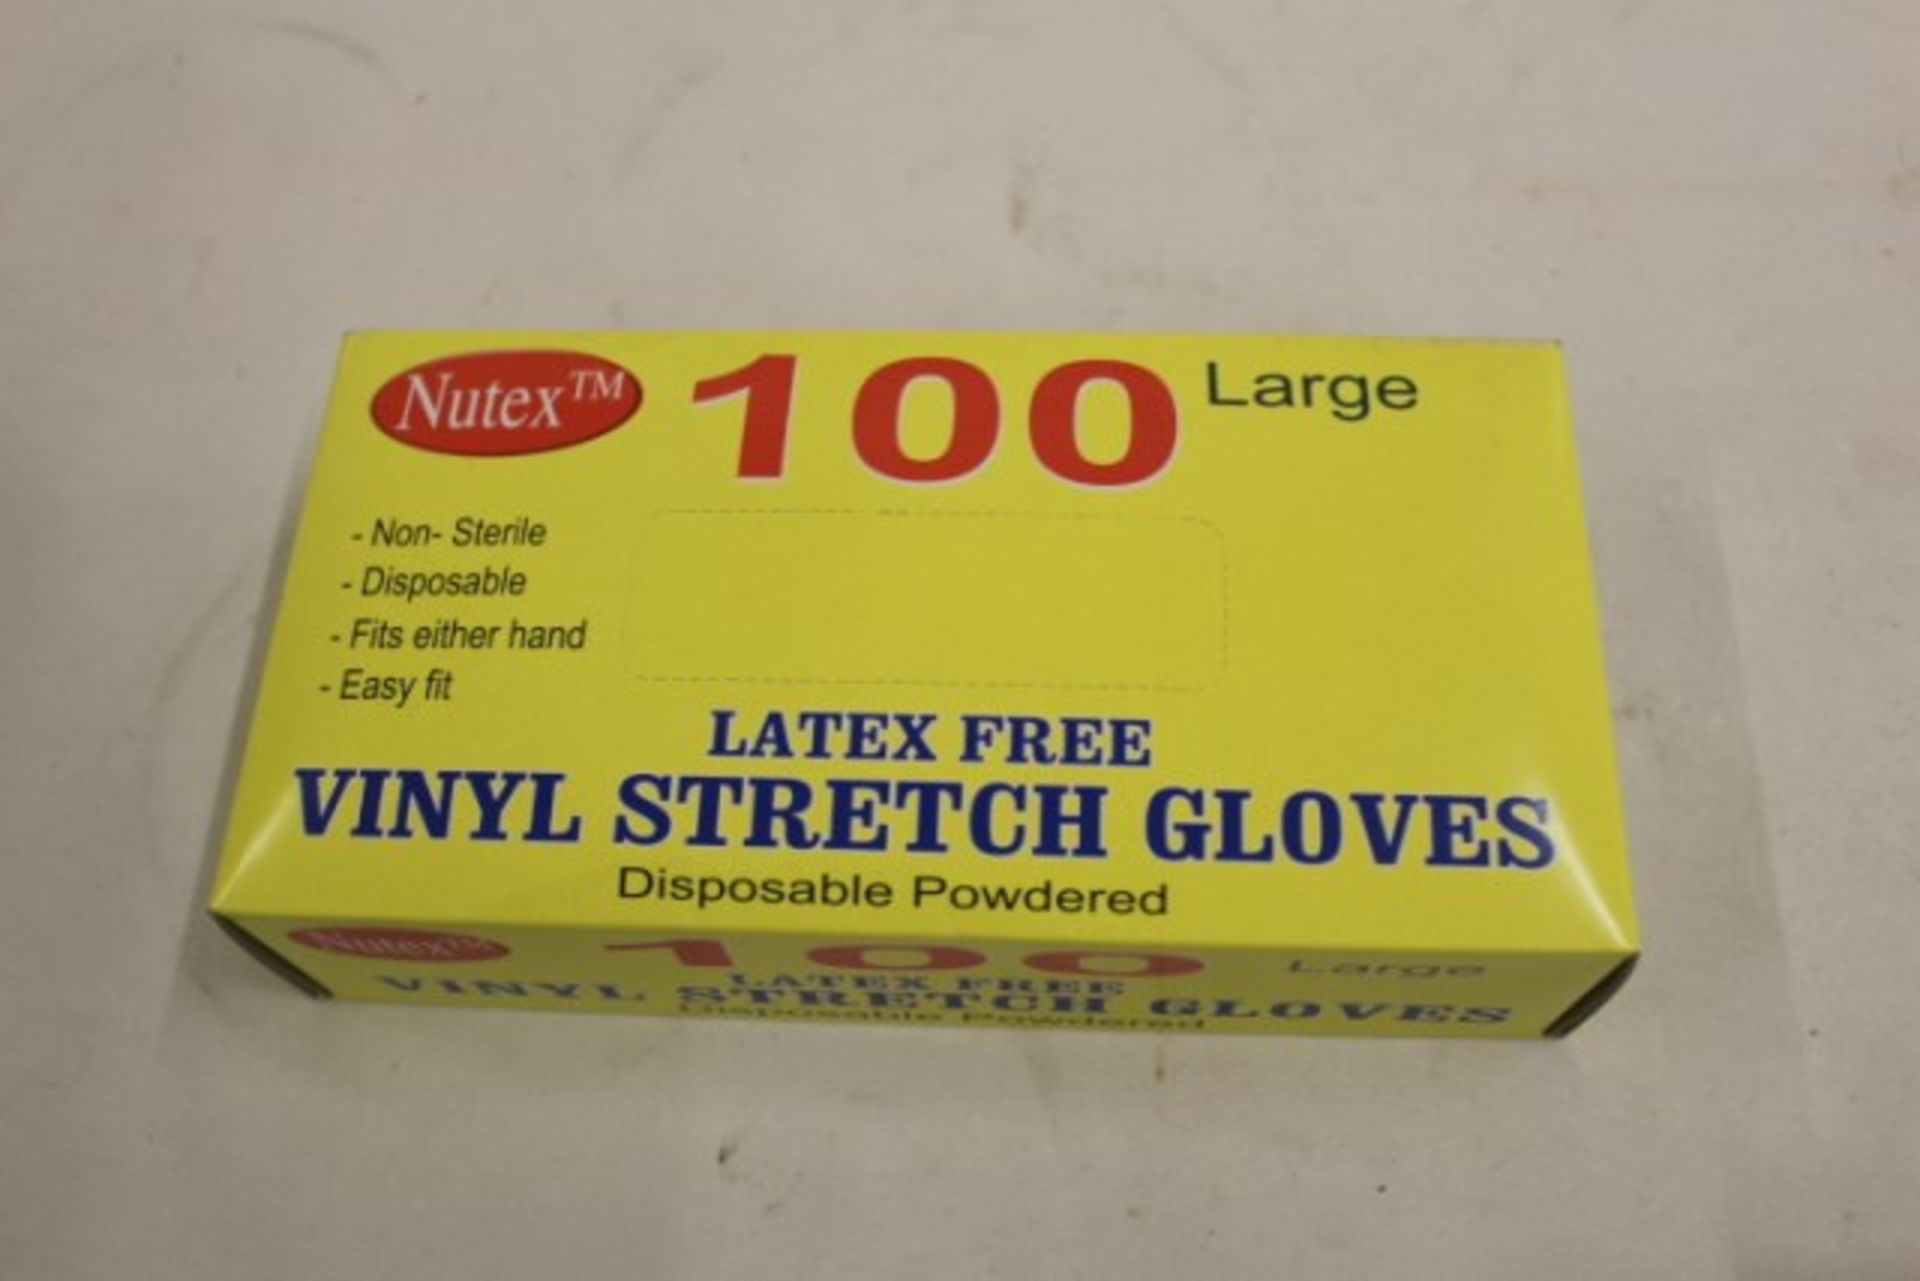 V Brand New 100 Pairs Latex Free Vinyl Stretch Gloves X 2 YOUR BID PRICE TO BE MULTIPLIED BY TWO